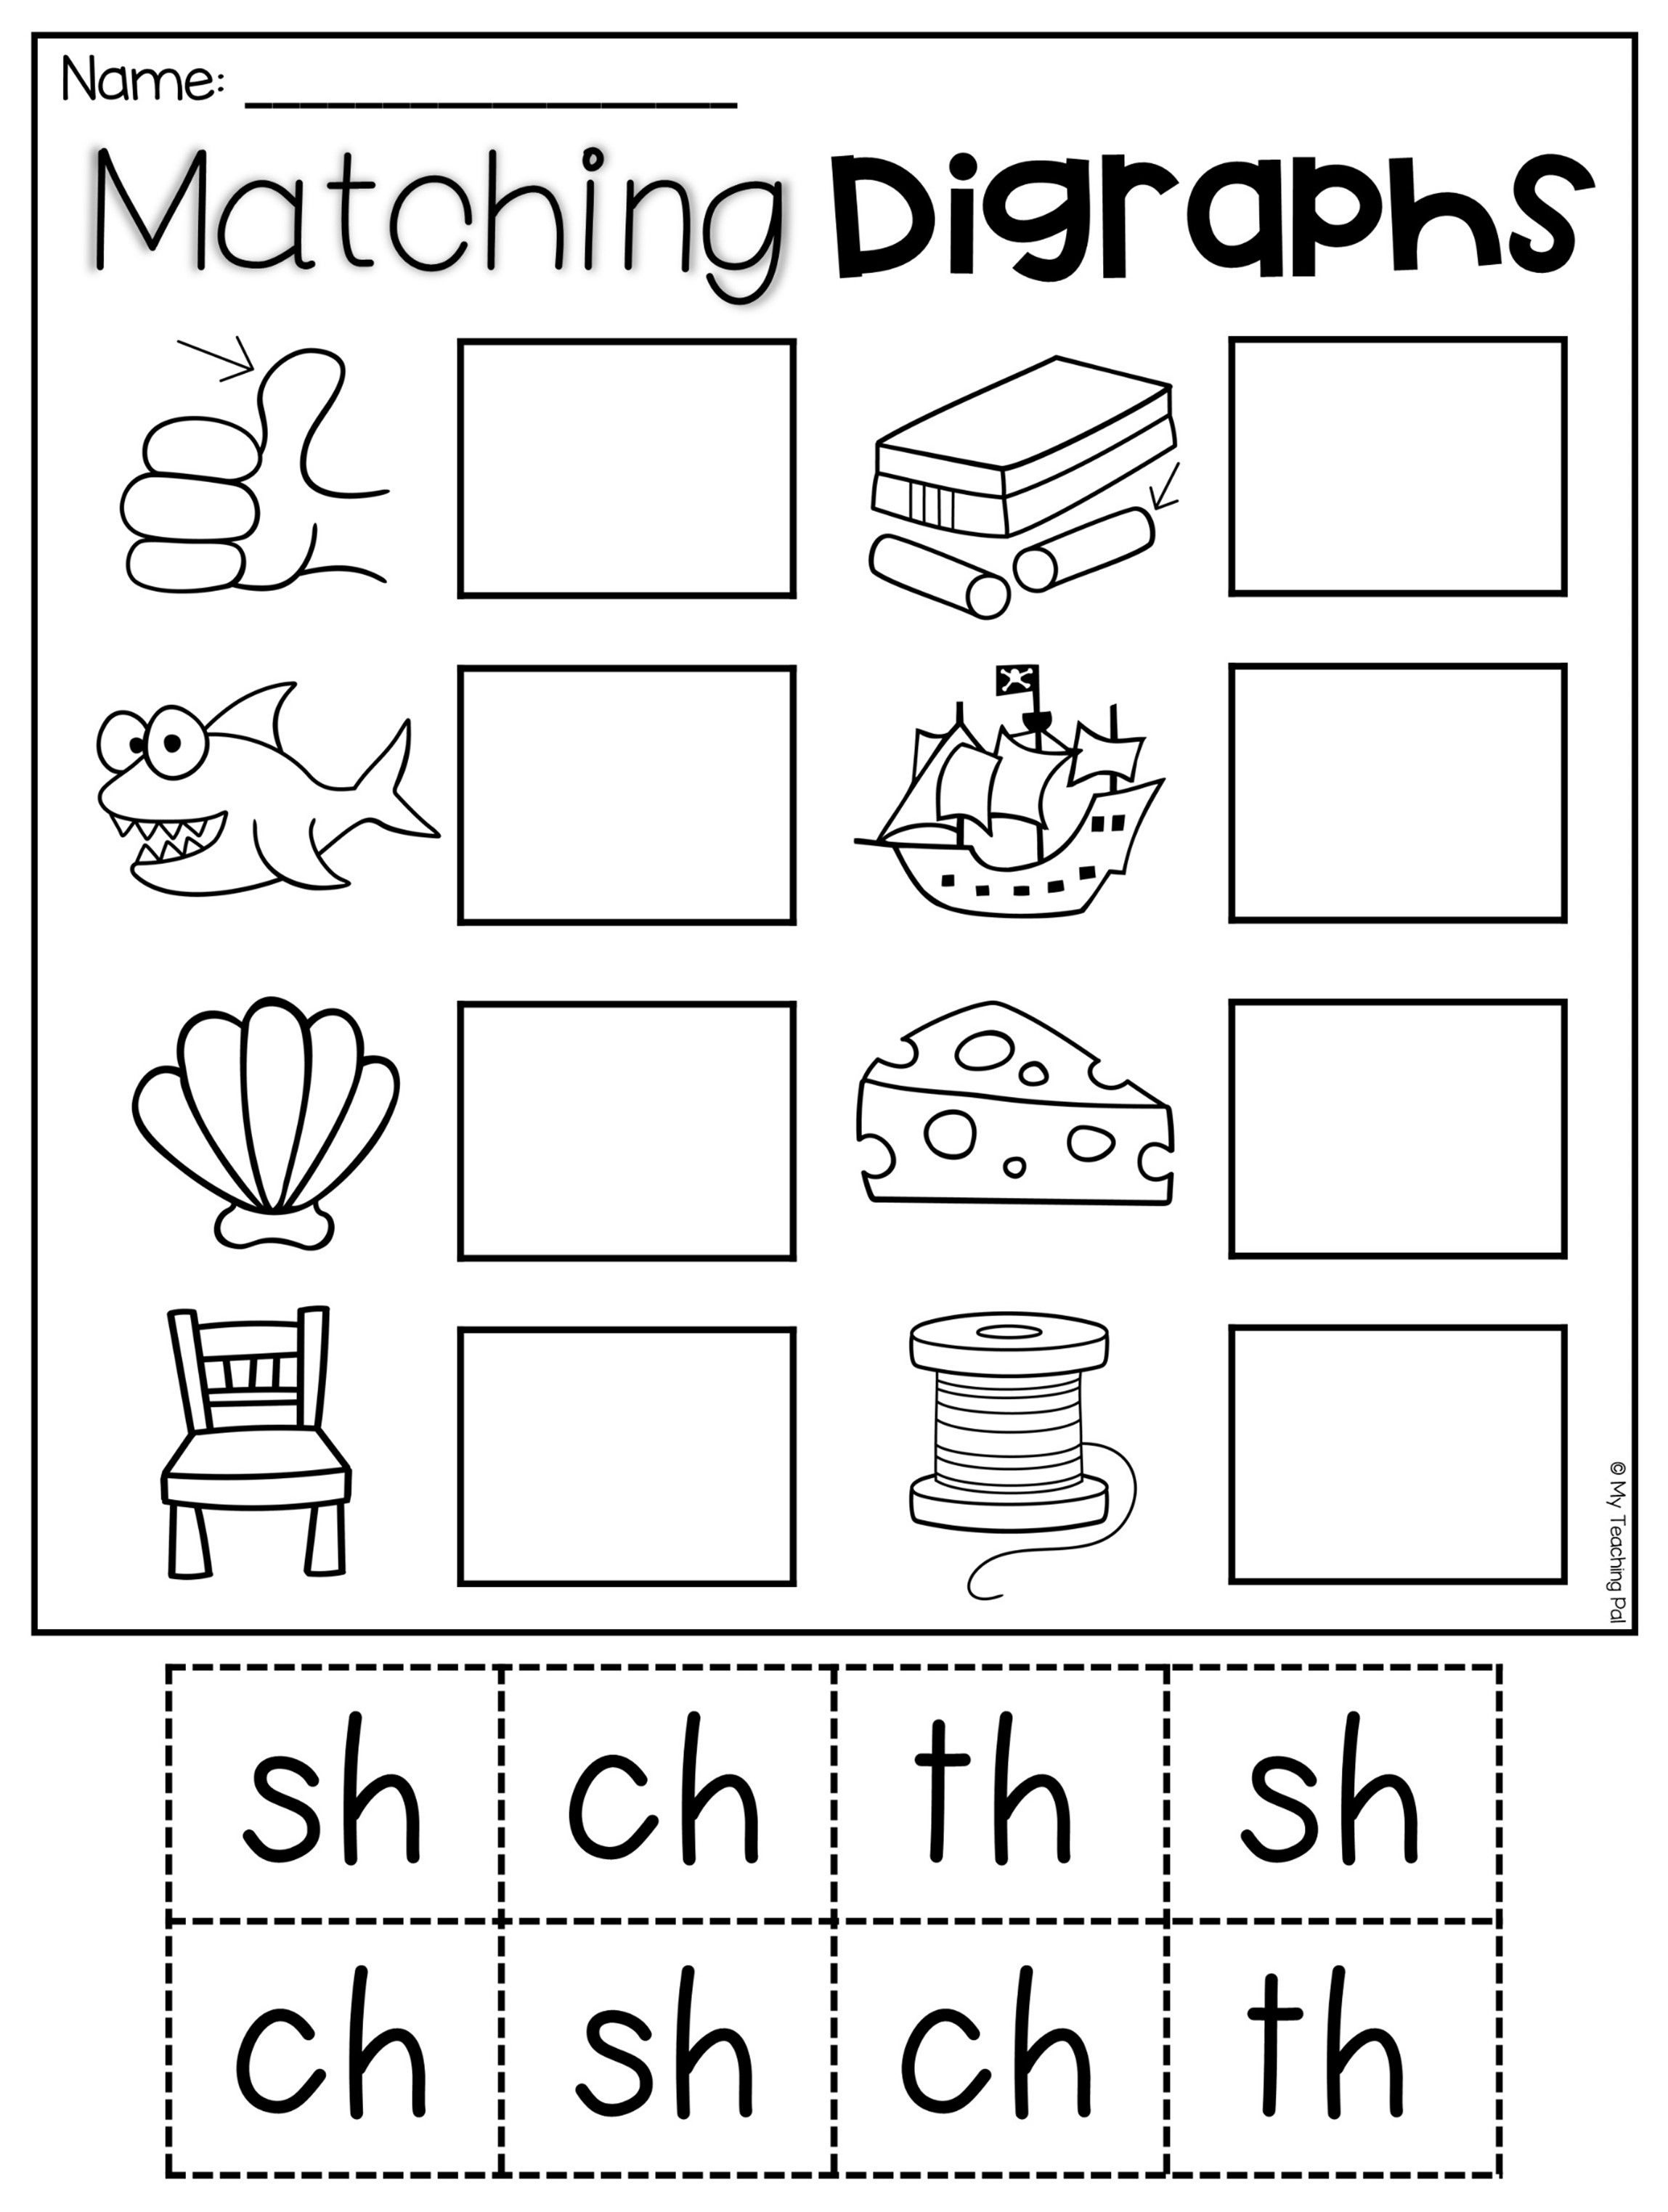 Digraph Worksheet Packet - Ch, Sh, Th, Wh, Ph | For The Classroom - Sh Worksheets Free Printable